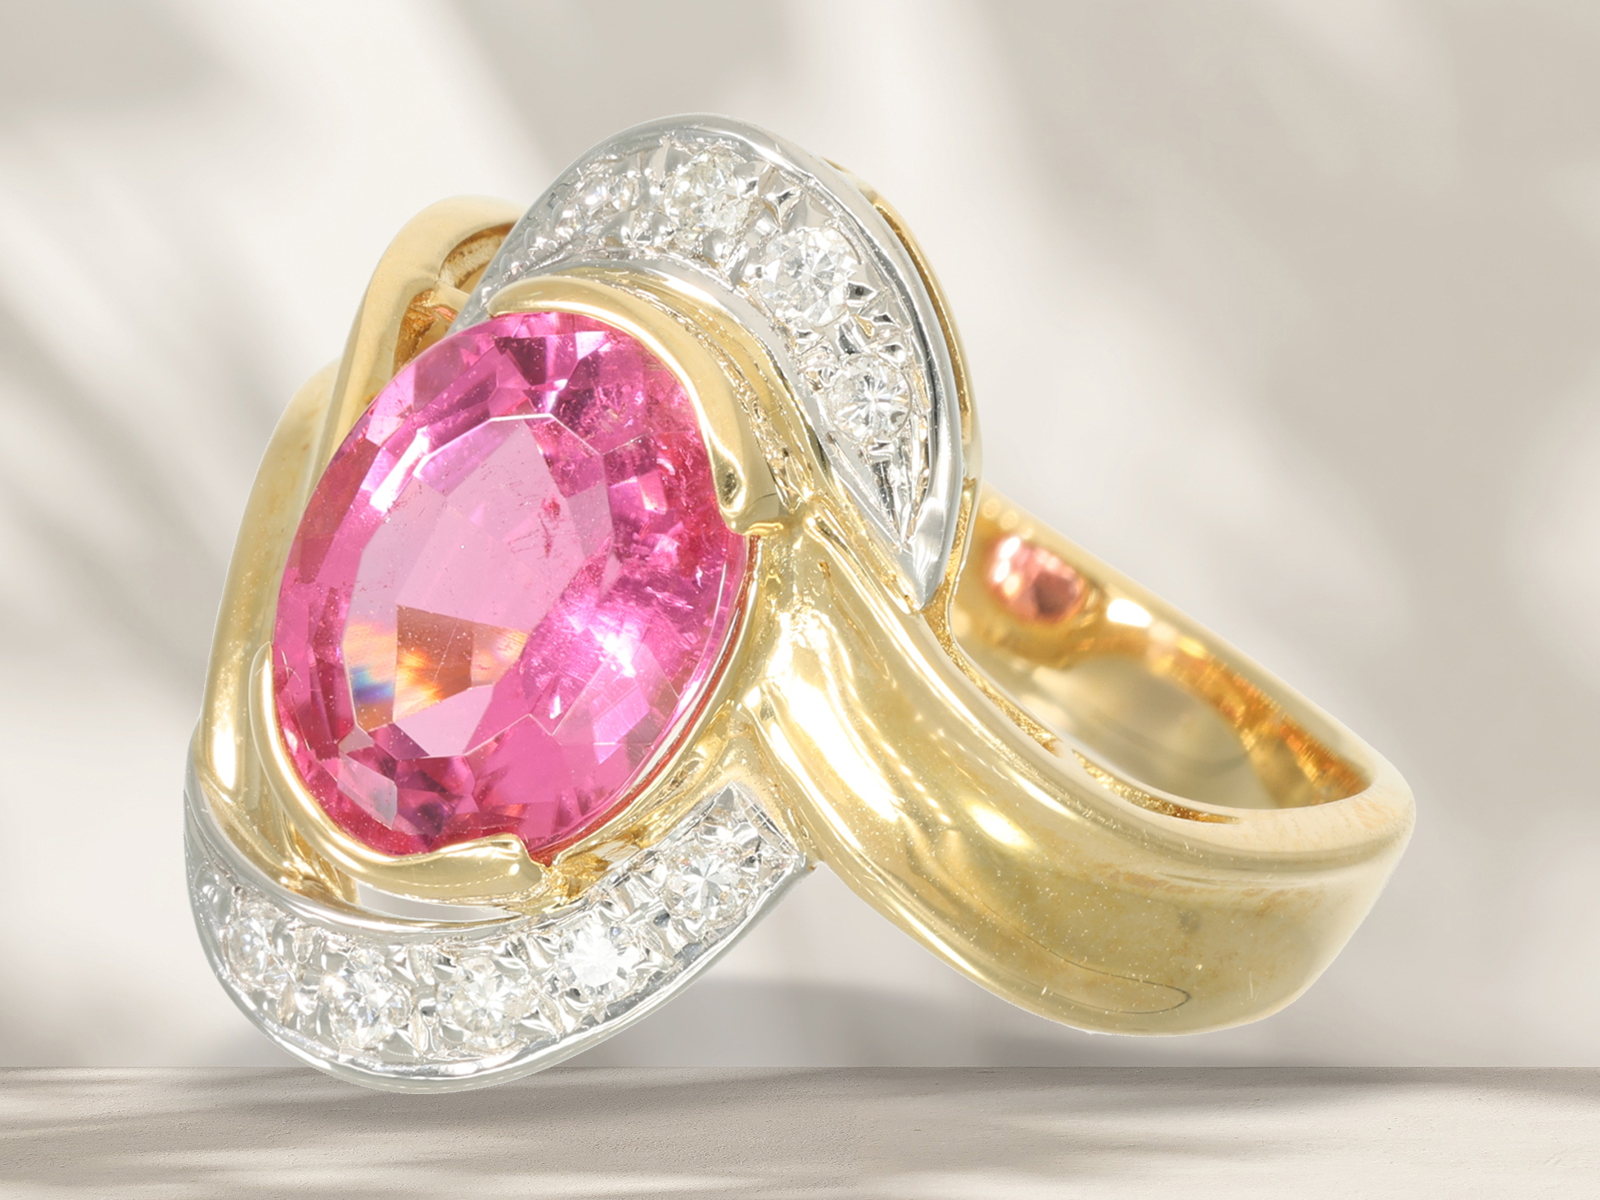 Ring: goldsmith ring with a rare "intense pink" tourmaline and brilliant-cut diamonds - Image 2 of 5